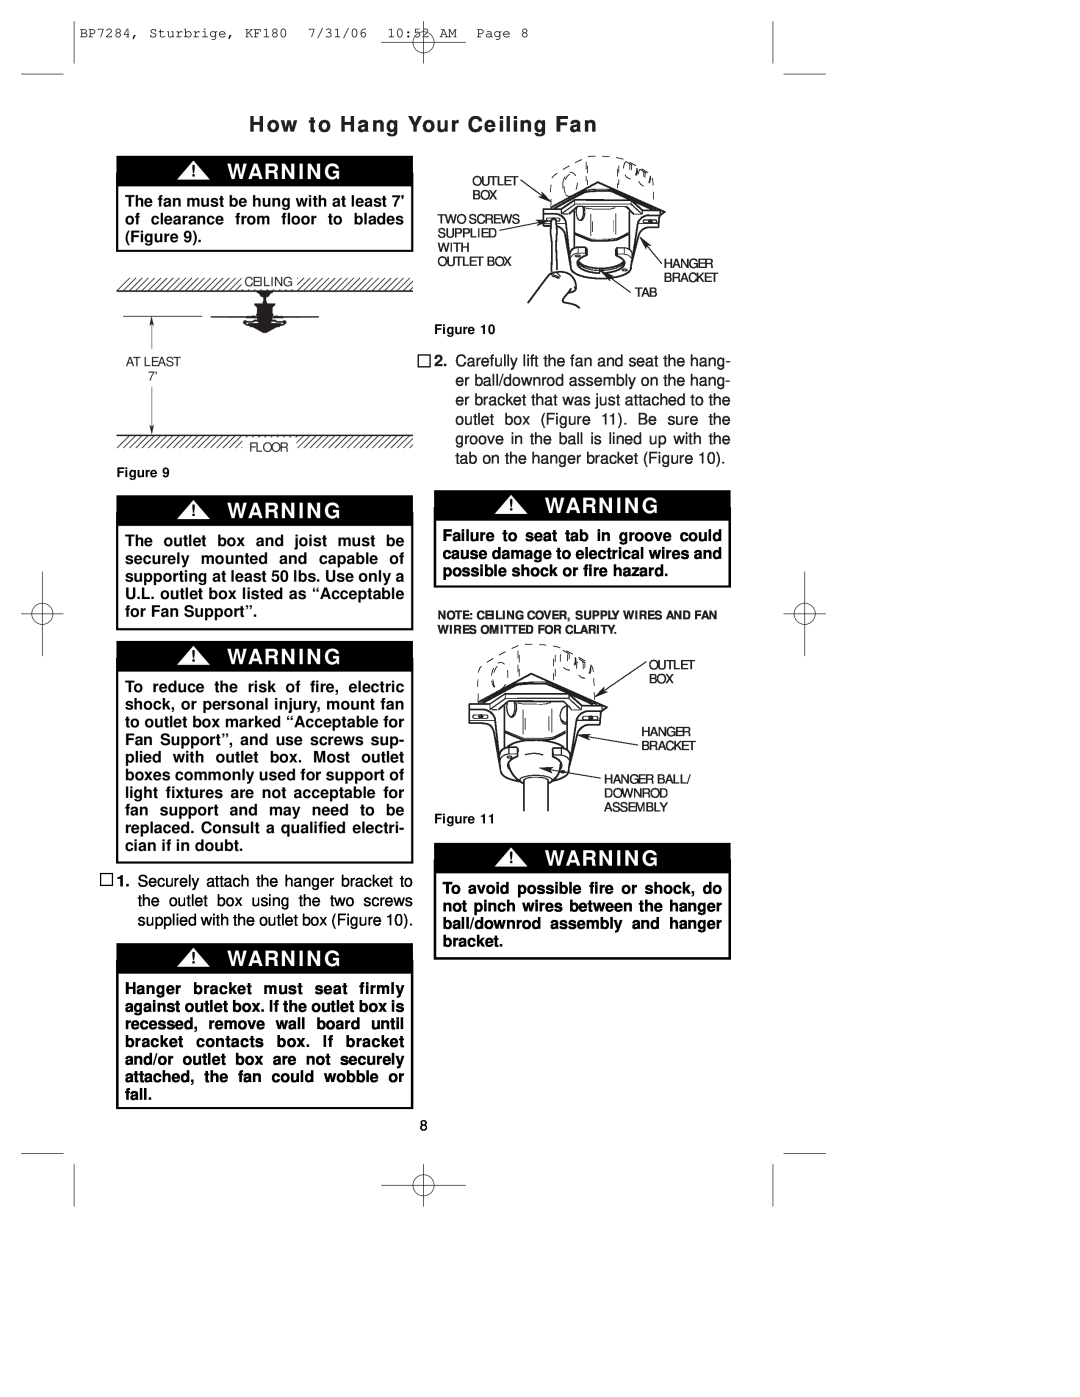 Emerson KF180 owner manual How to Hang Your Ceiling Fan 